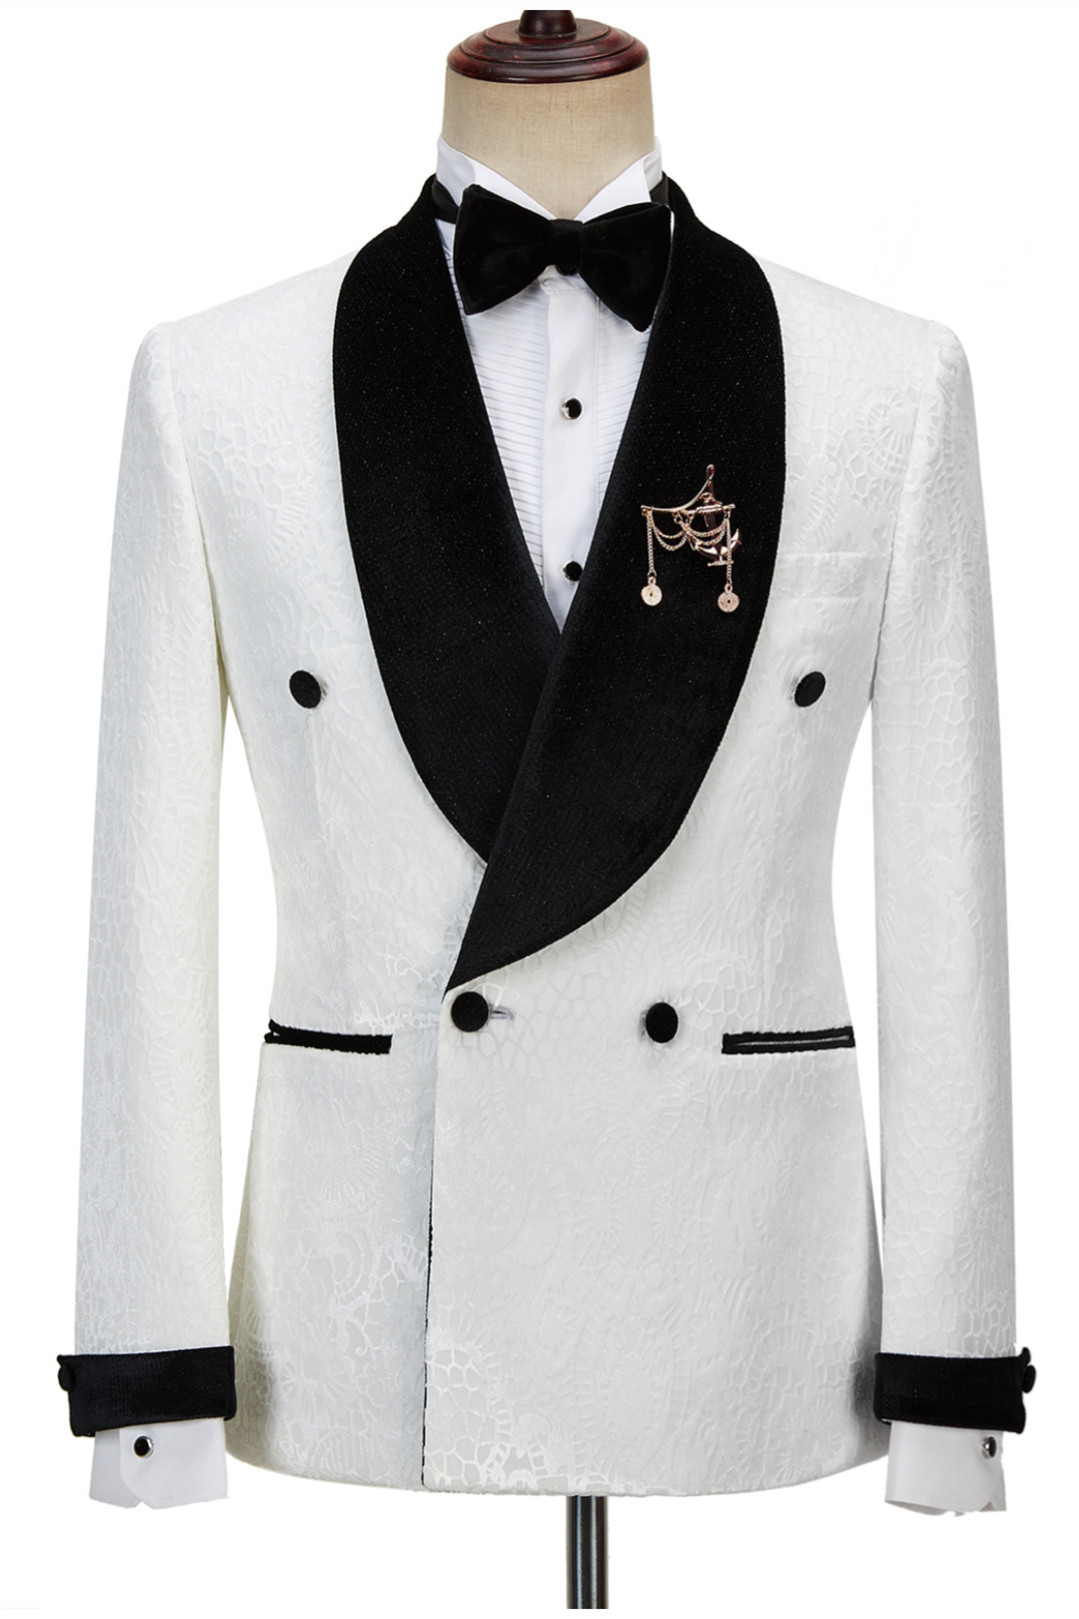 Dresseswow Chic Jacquard Shawl Lapel Reception Suit For Guys Double Breasted White Sparkle